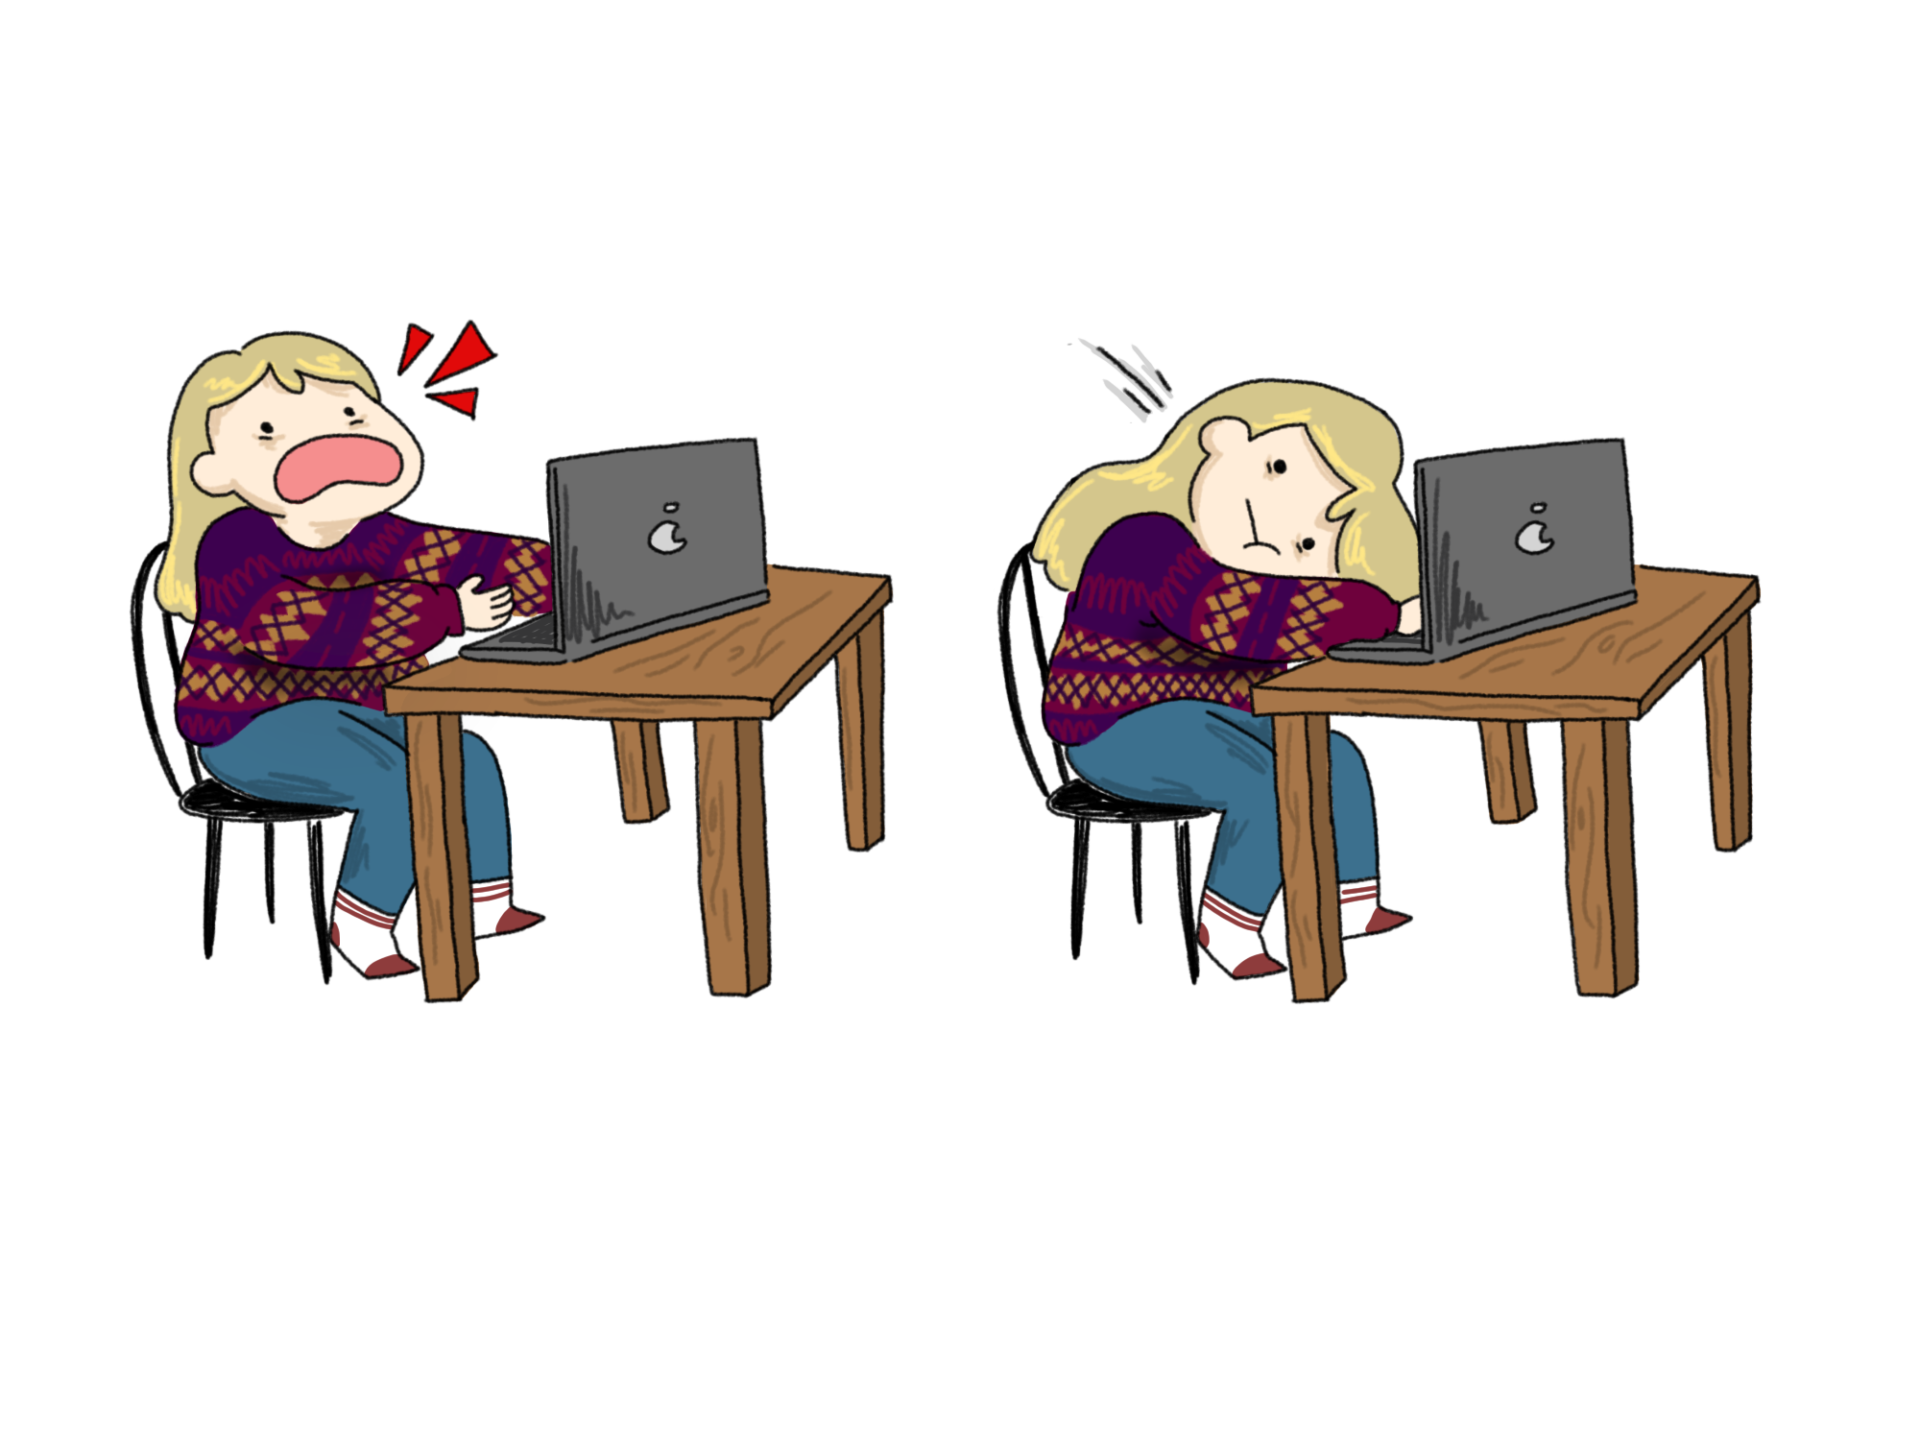 An illustration of a person sitting at a desk, stressing out in front of their computer.